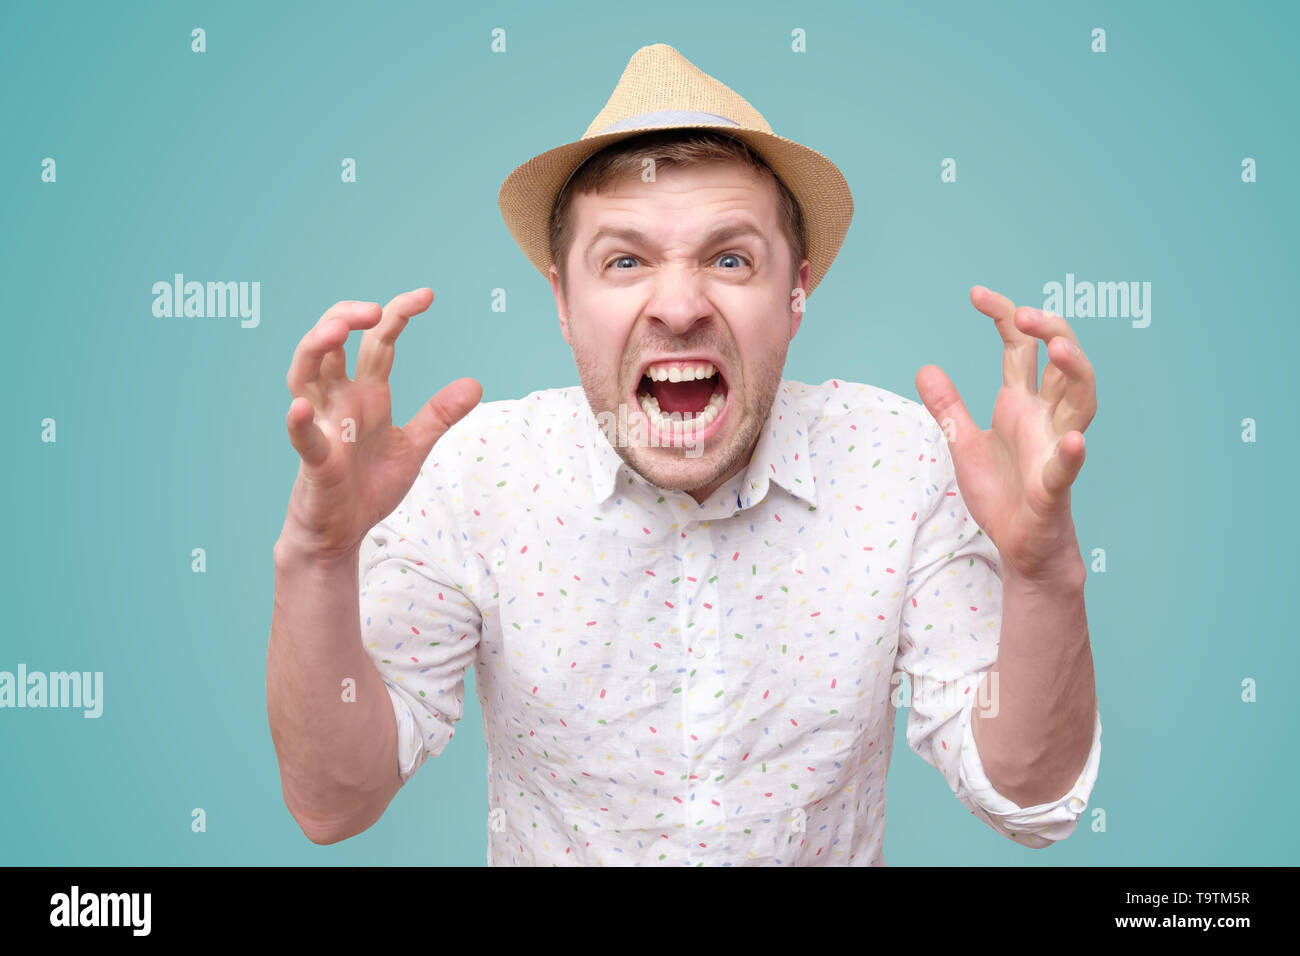 Furious,enraged man with mouth opened in shout, show level of his anger, isolated over blue background Stock Photo